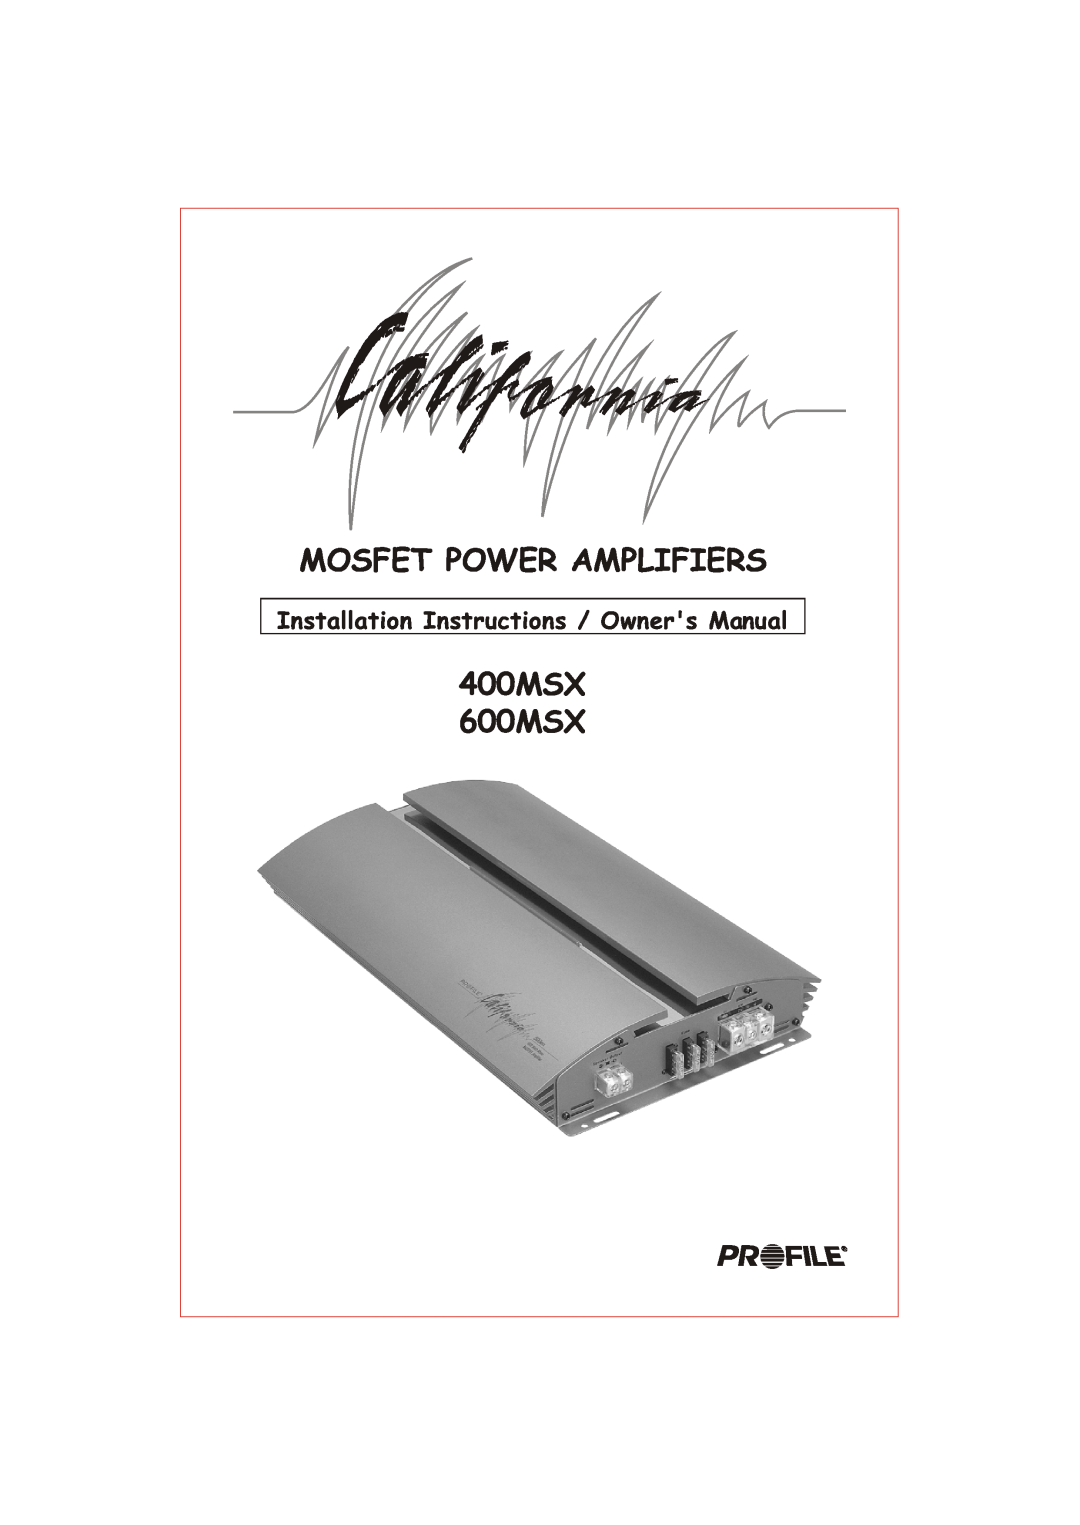 Profile 400MSX installation instructions 600MSX, Mosfet Power Amplifiers 